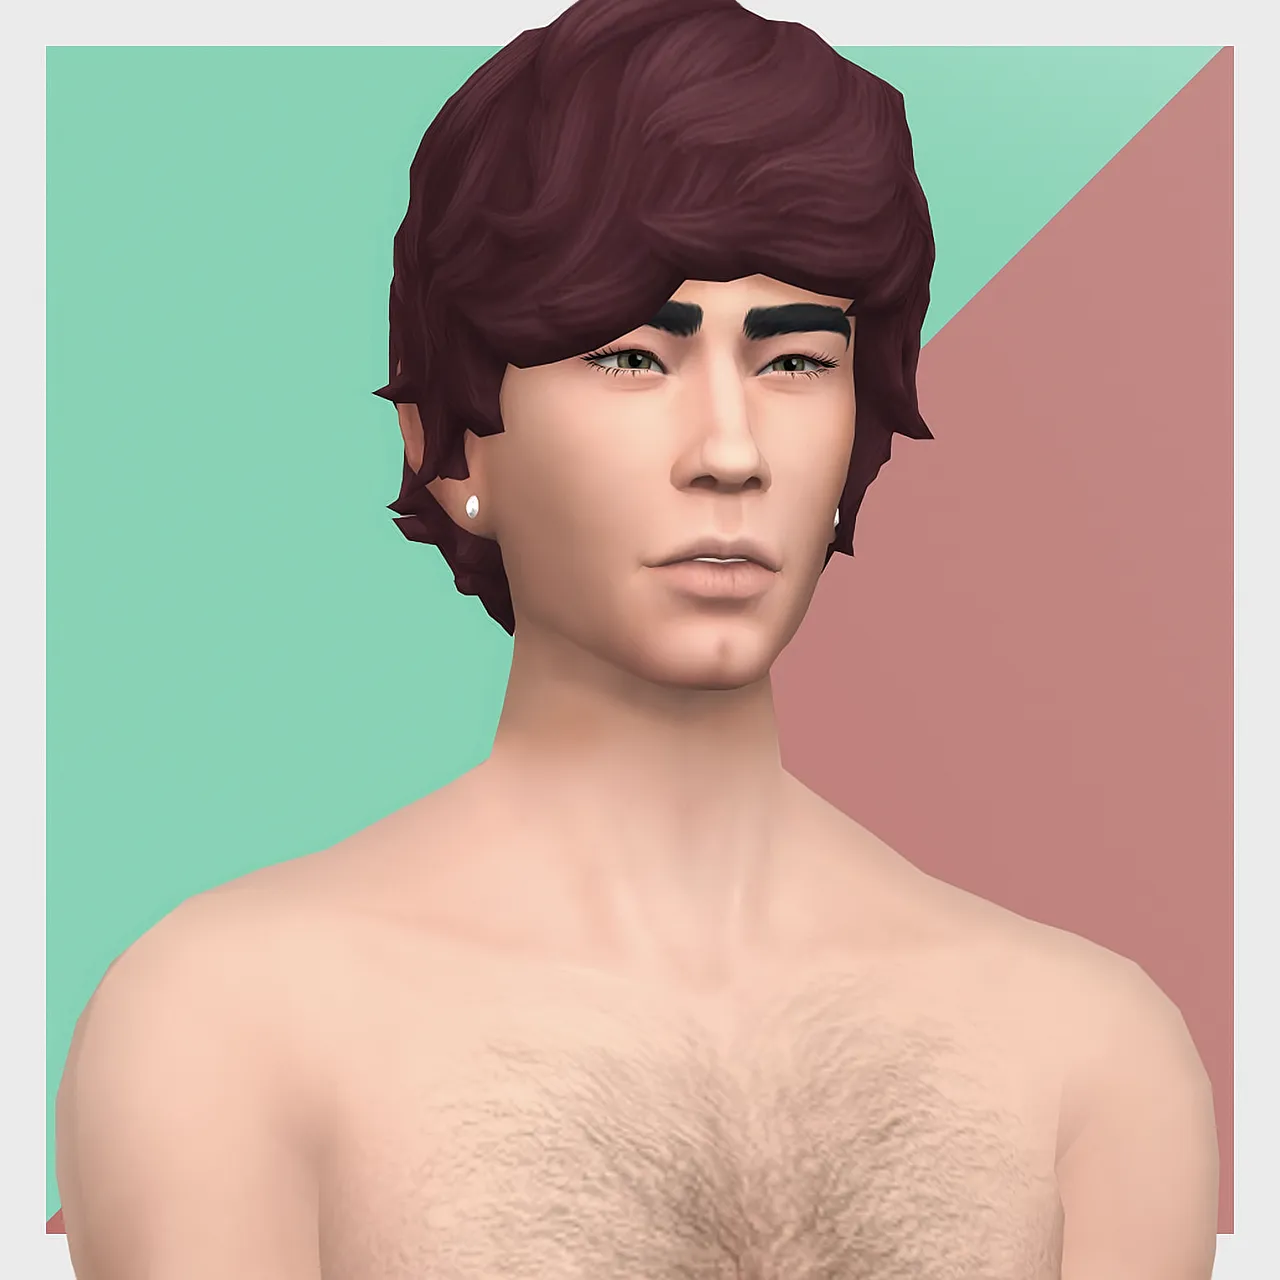 SP08 Male & Female Hairs ReTextured/Recolored